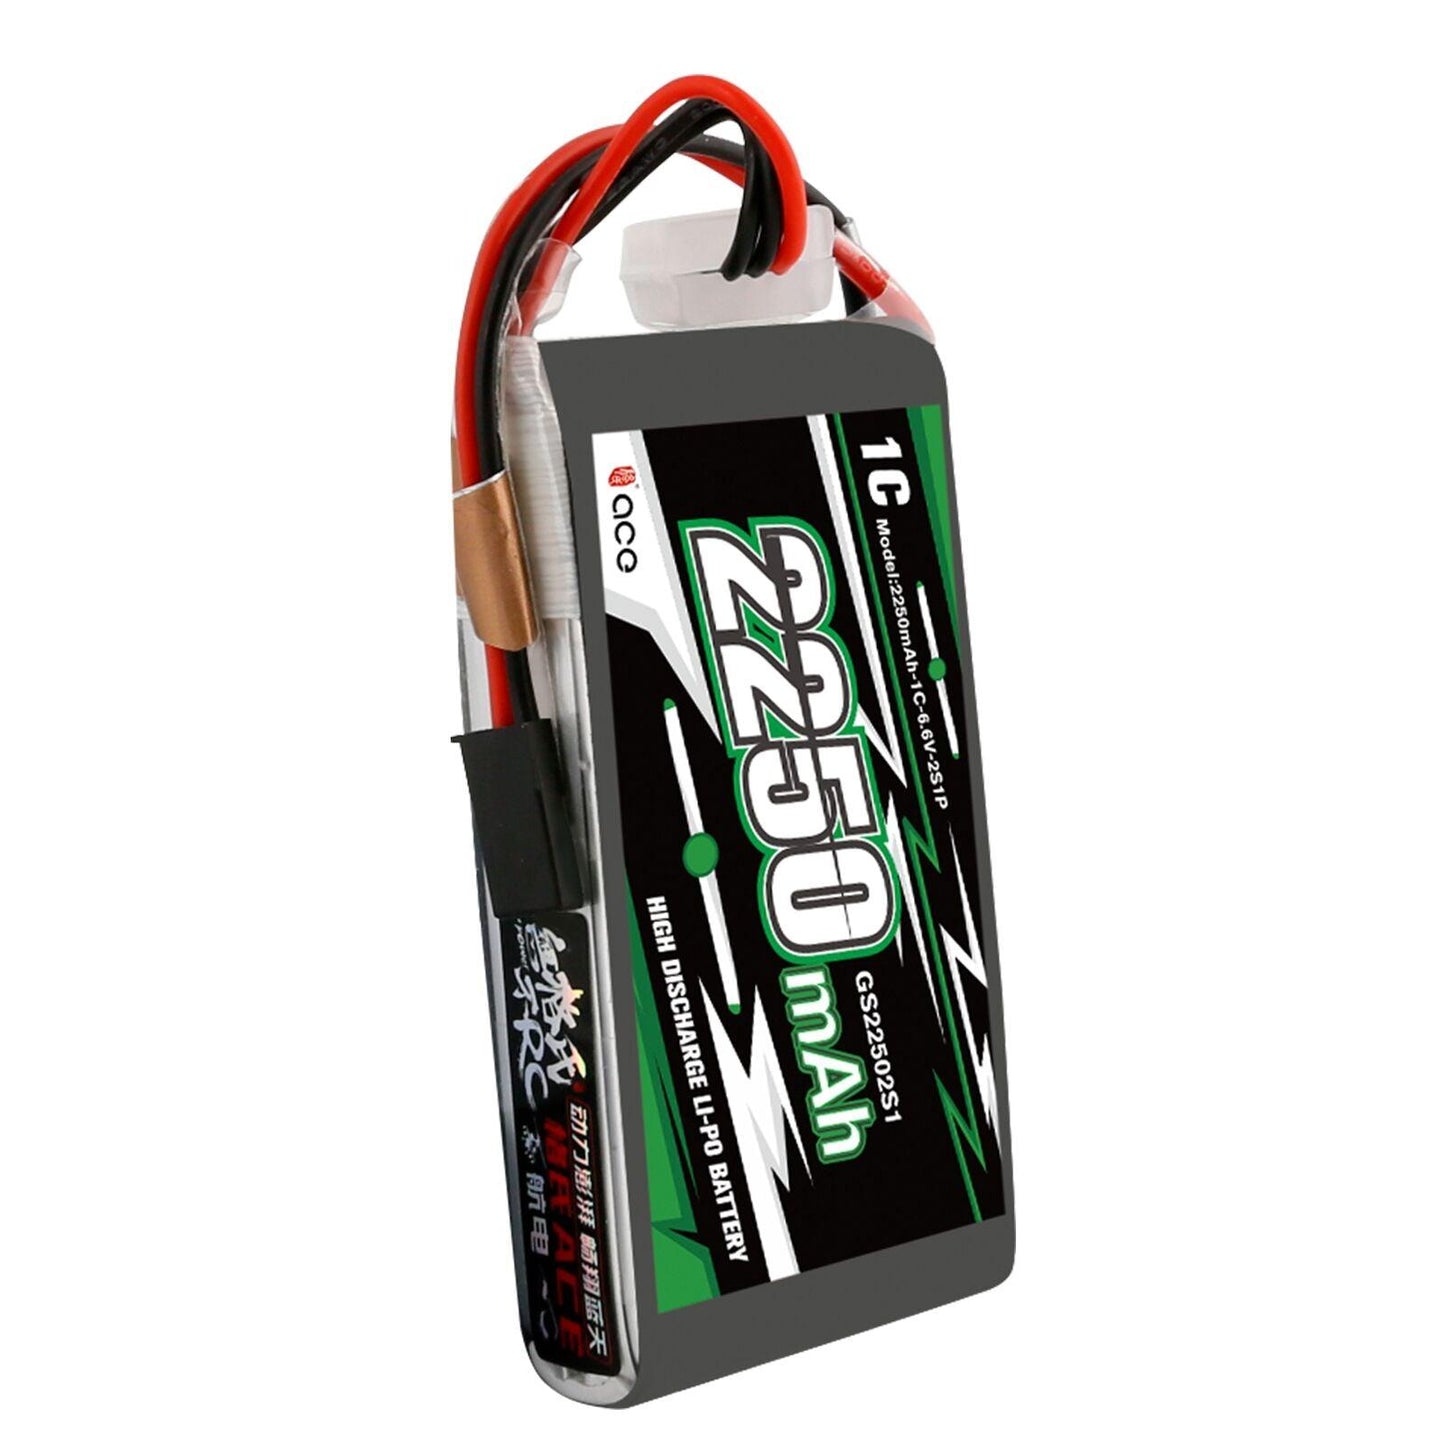 Gens ace 2250mAh 6.6V 2S 2S1P LiFe Battery Pack with BBL1 Futaba 3P Plug for 14SG 4PLS T8J Remote Control - RCDrone